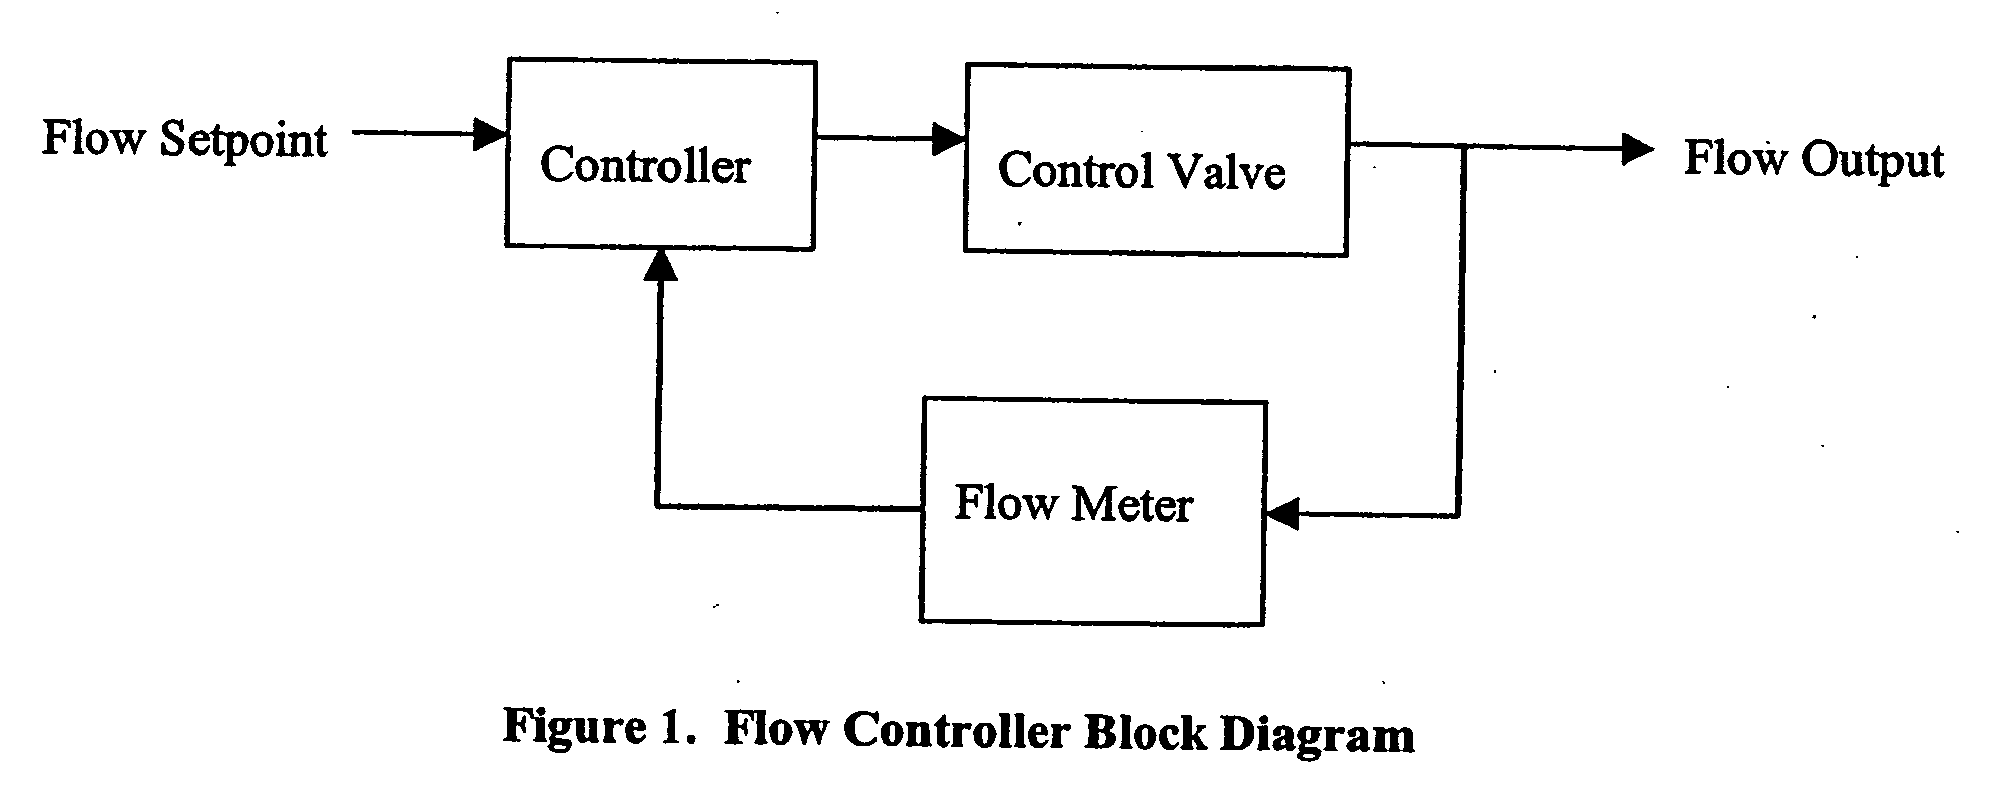 Method and apparatus for controlling the valve position of a variable orifice flow meter